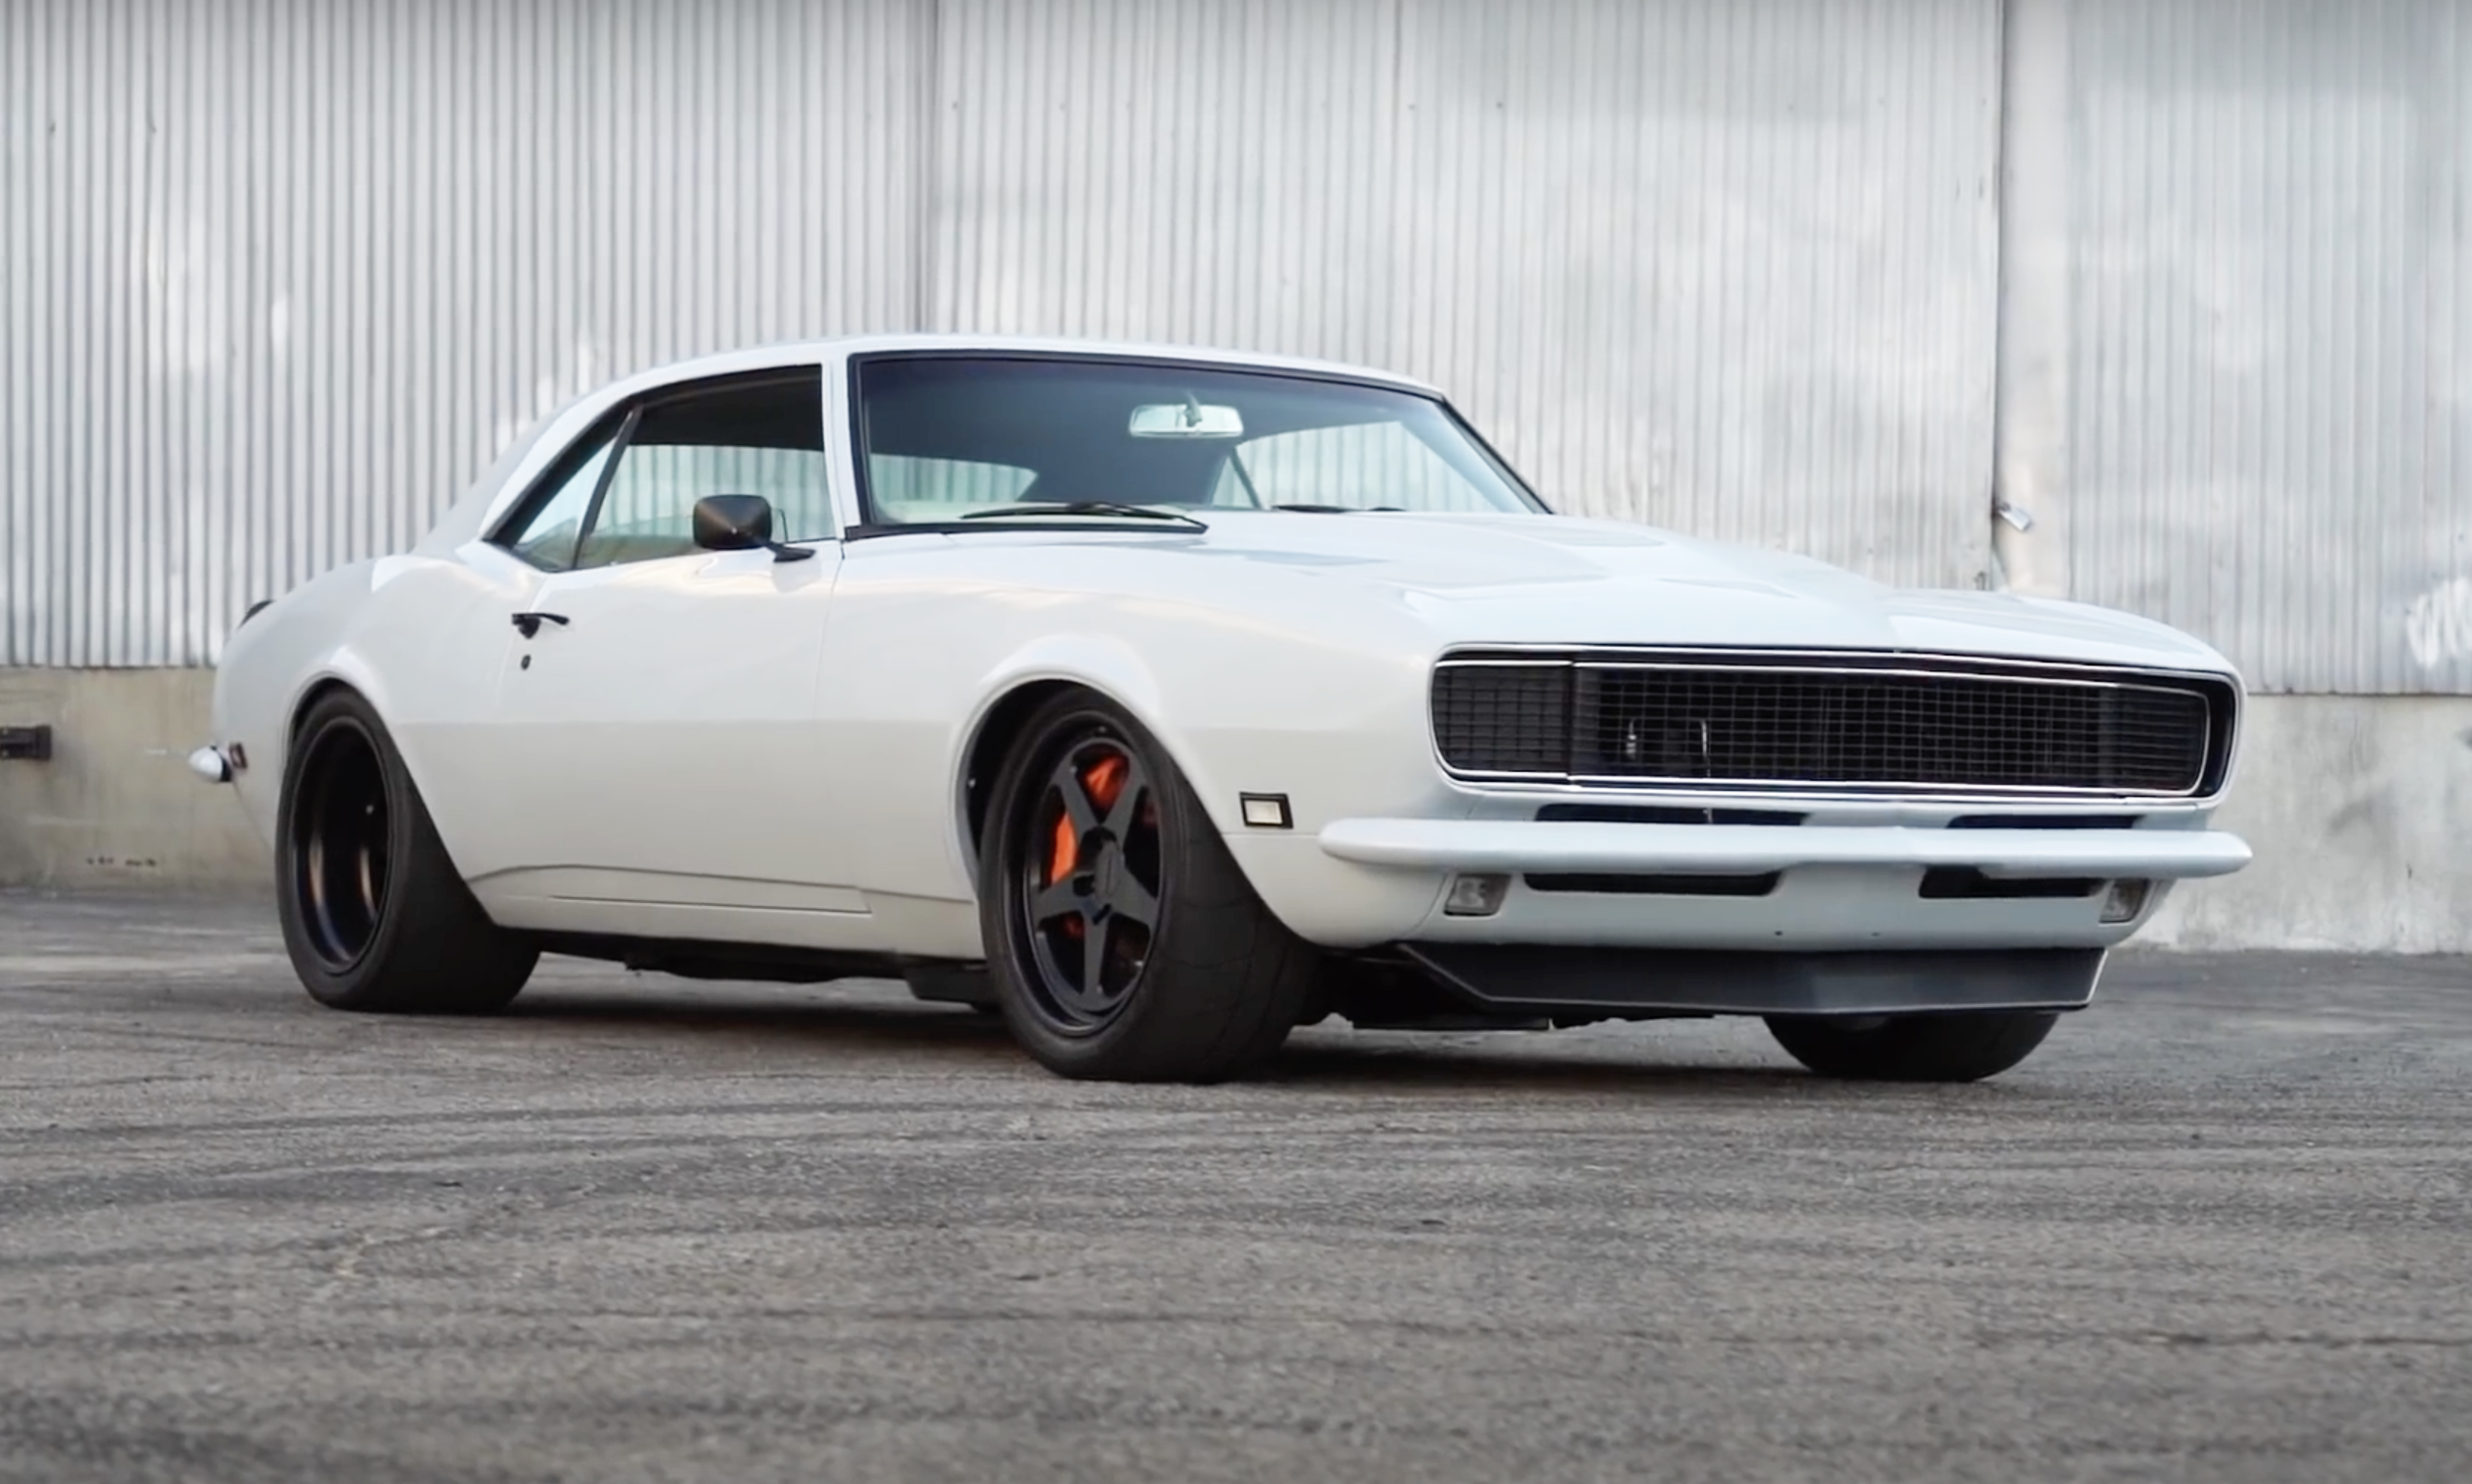 Someone Dropped Over $100k To Mod This '68 Camaro, Could Be Yours For $75k